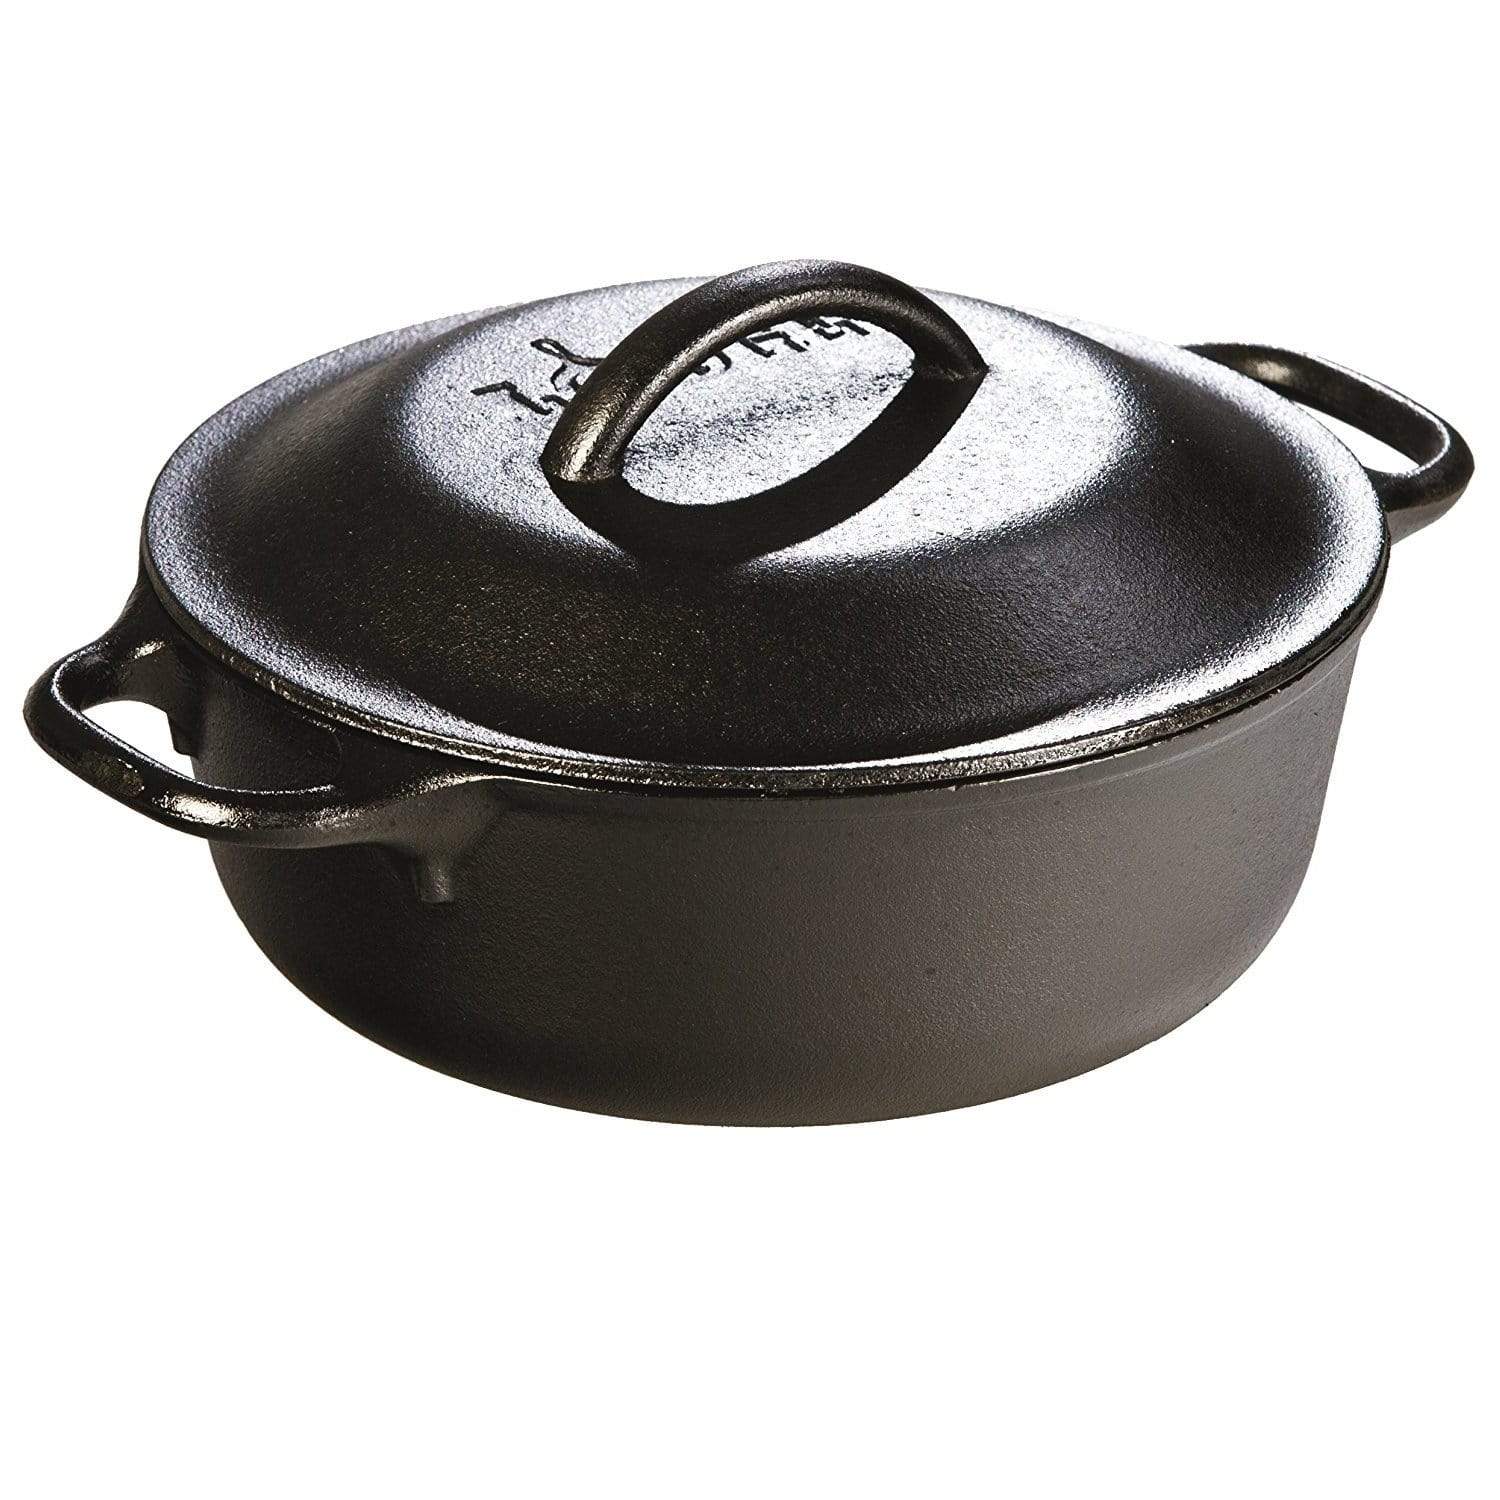 Lodge Cast Iron Camping & Outdoor : Cooking Lodge 8in Cast Iron Serving Pot Pre-Seasoned 2-Quart